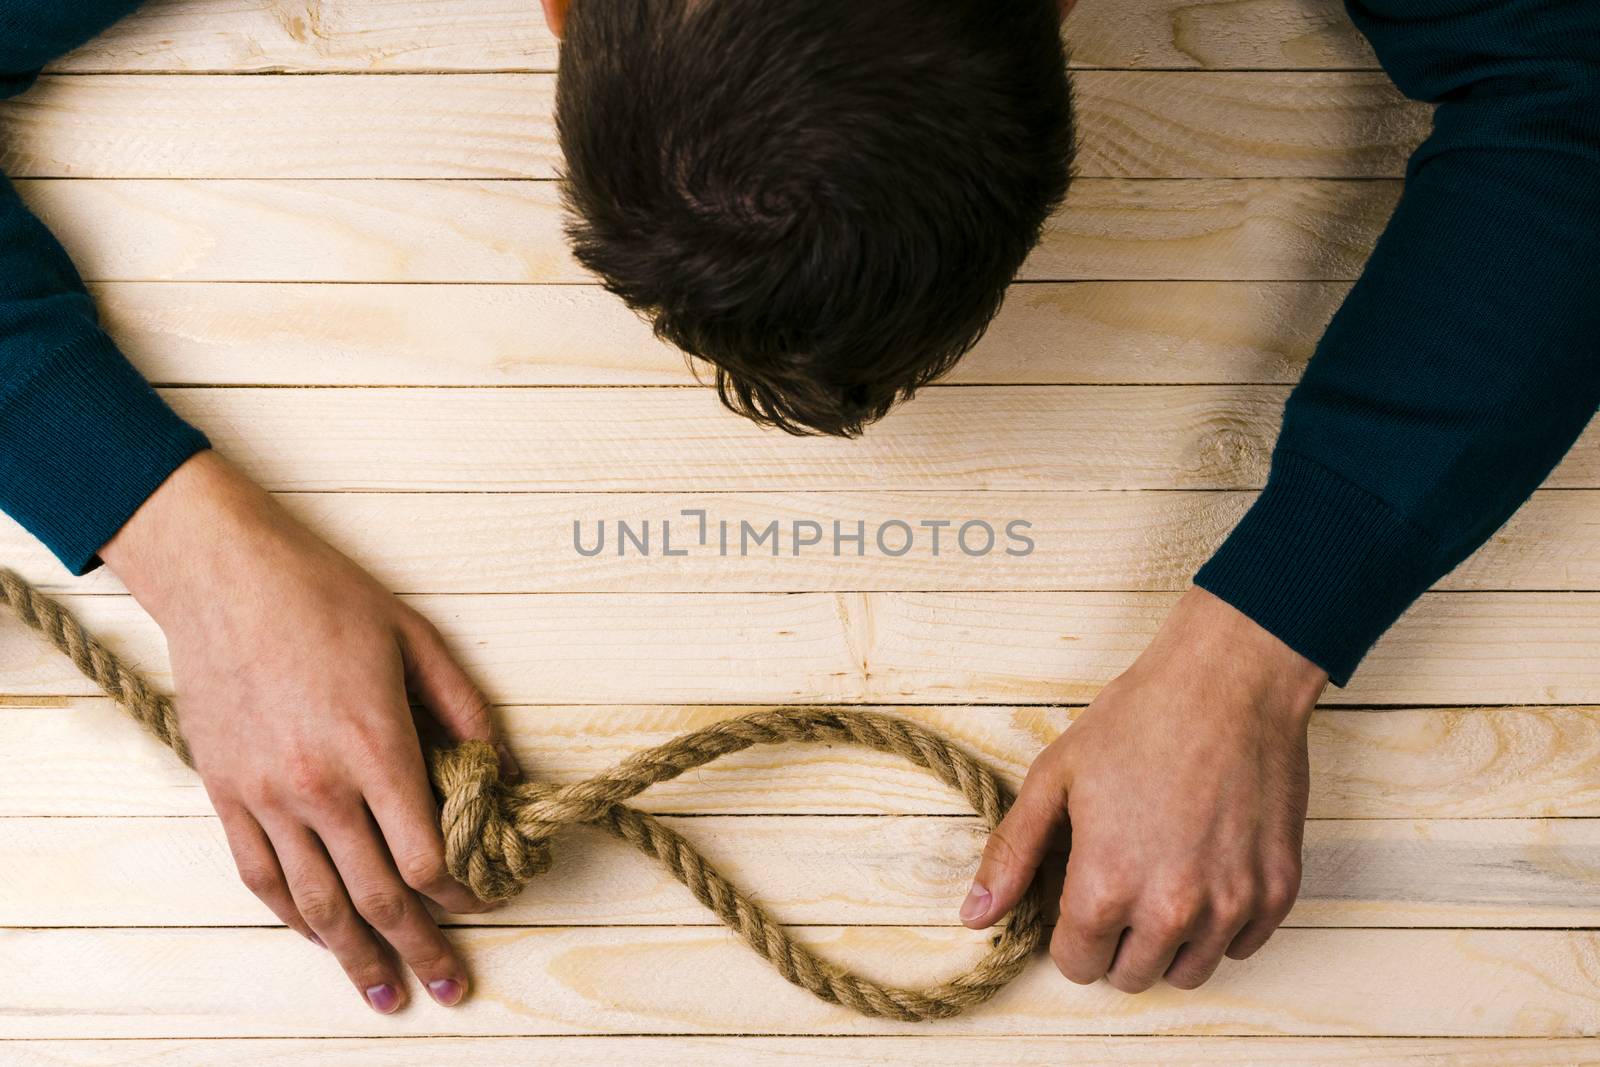 A man holds a loop of rope in his hands. A mental health day.